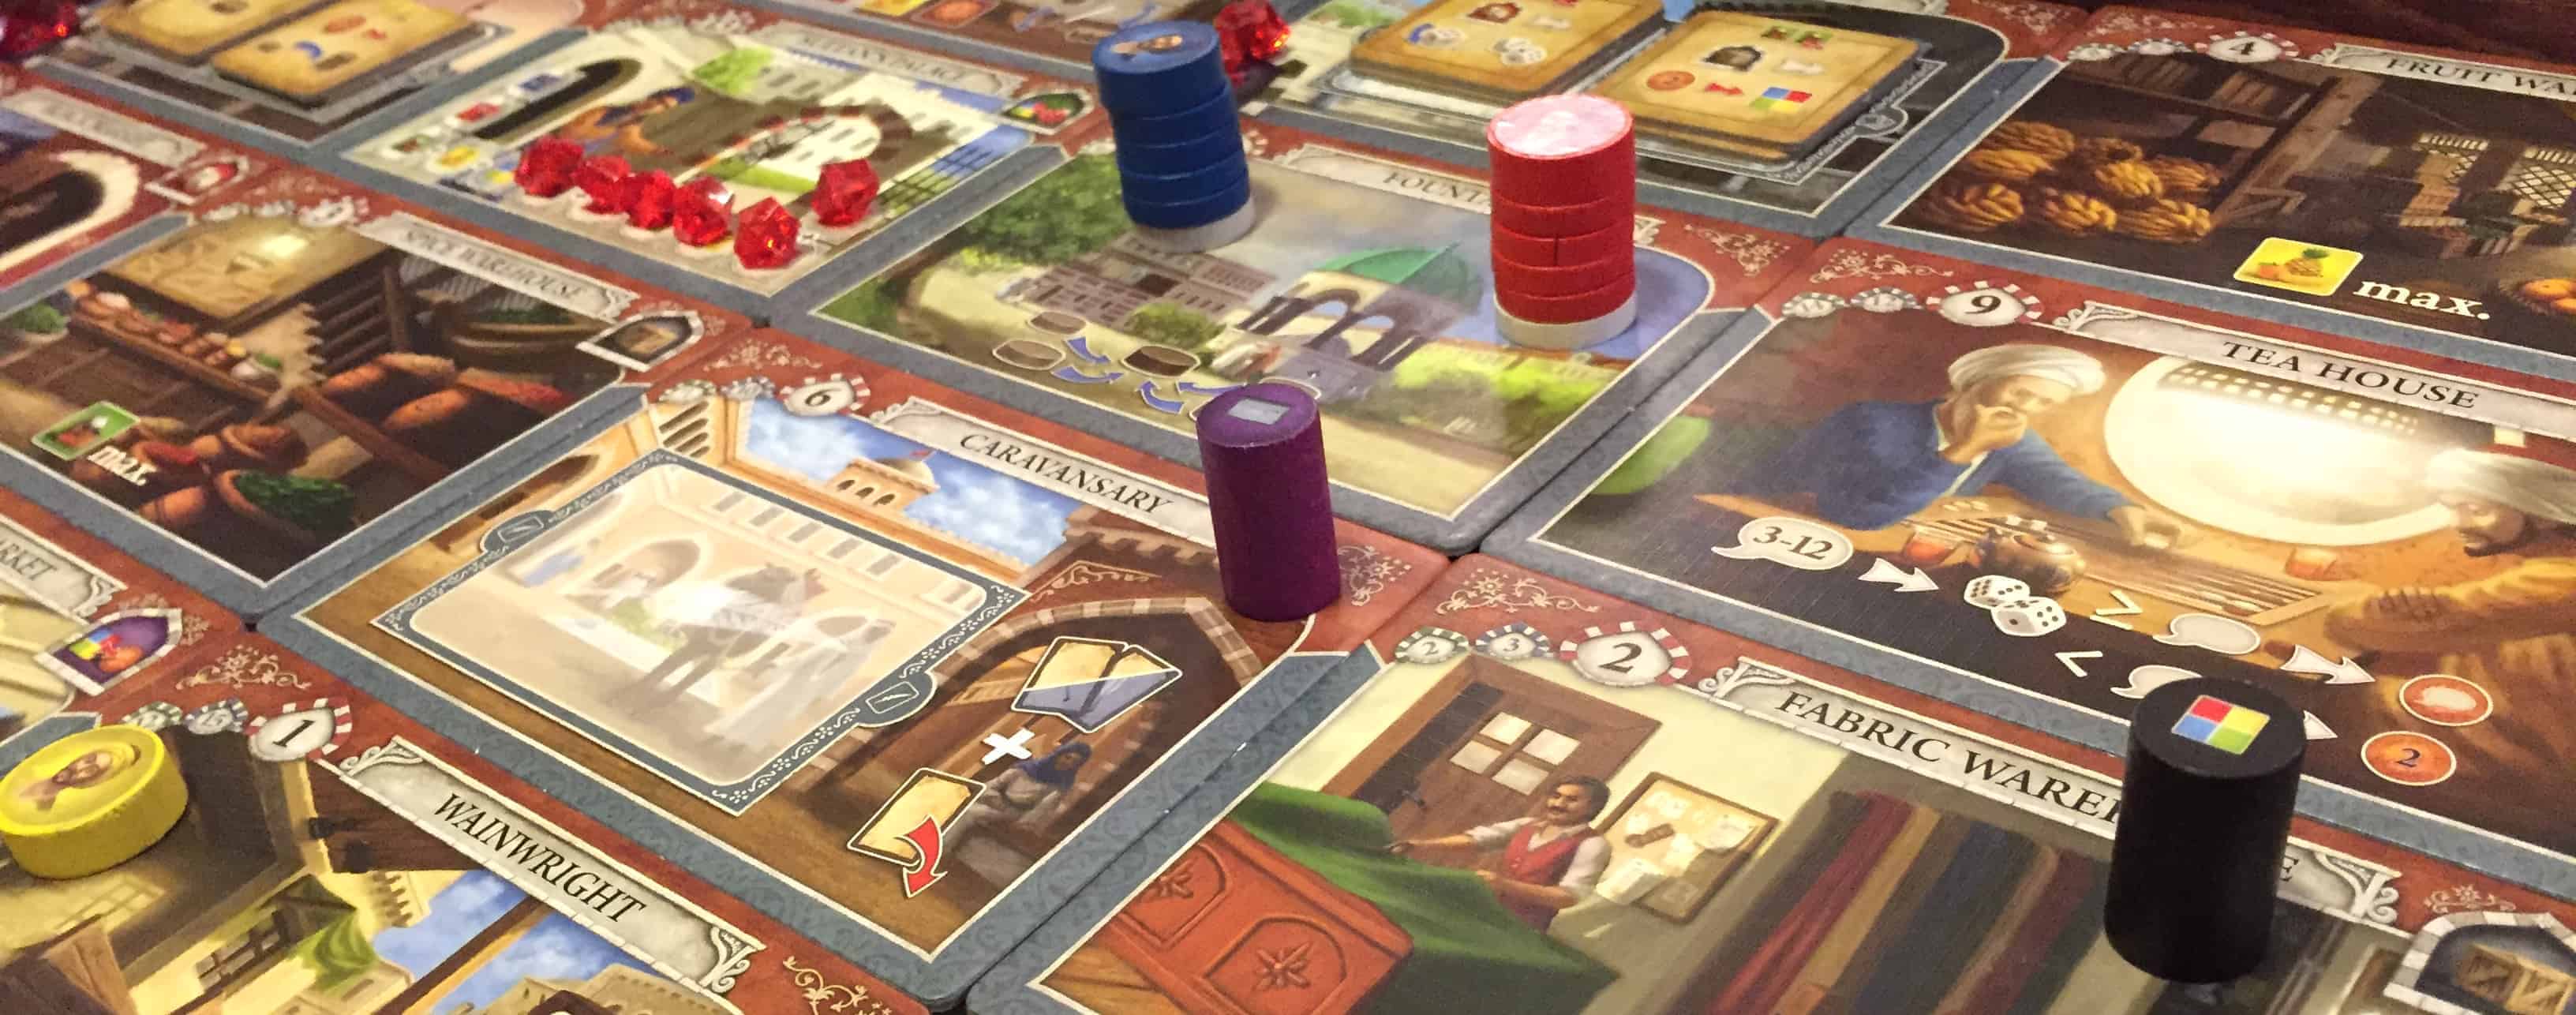 If you like middle east themes and trading, you may find Istanbul to be the best family board game for you!